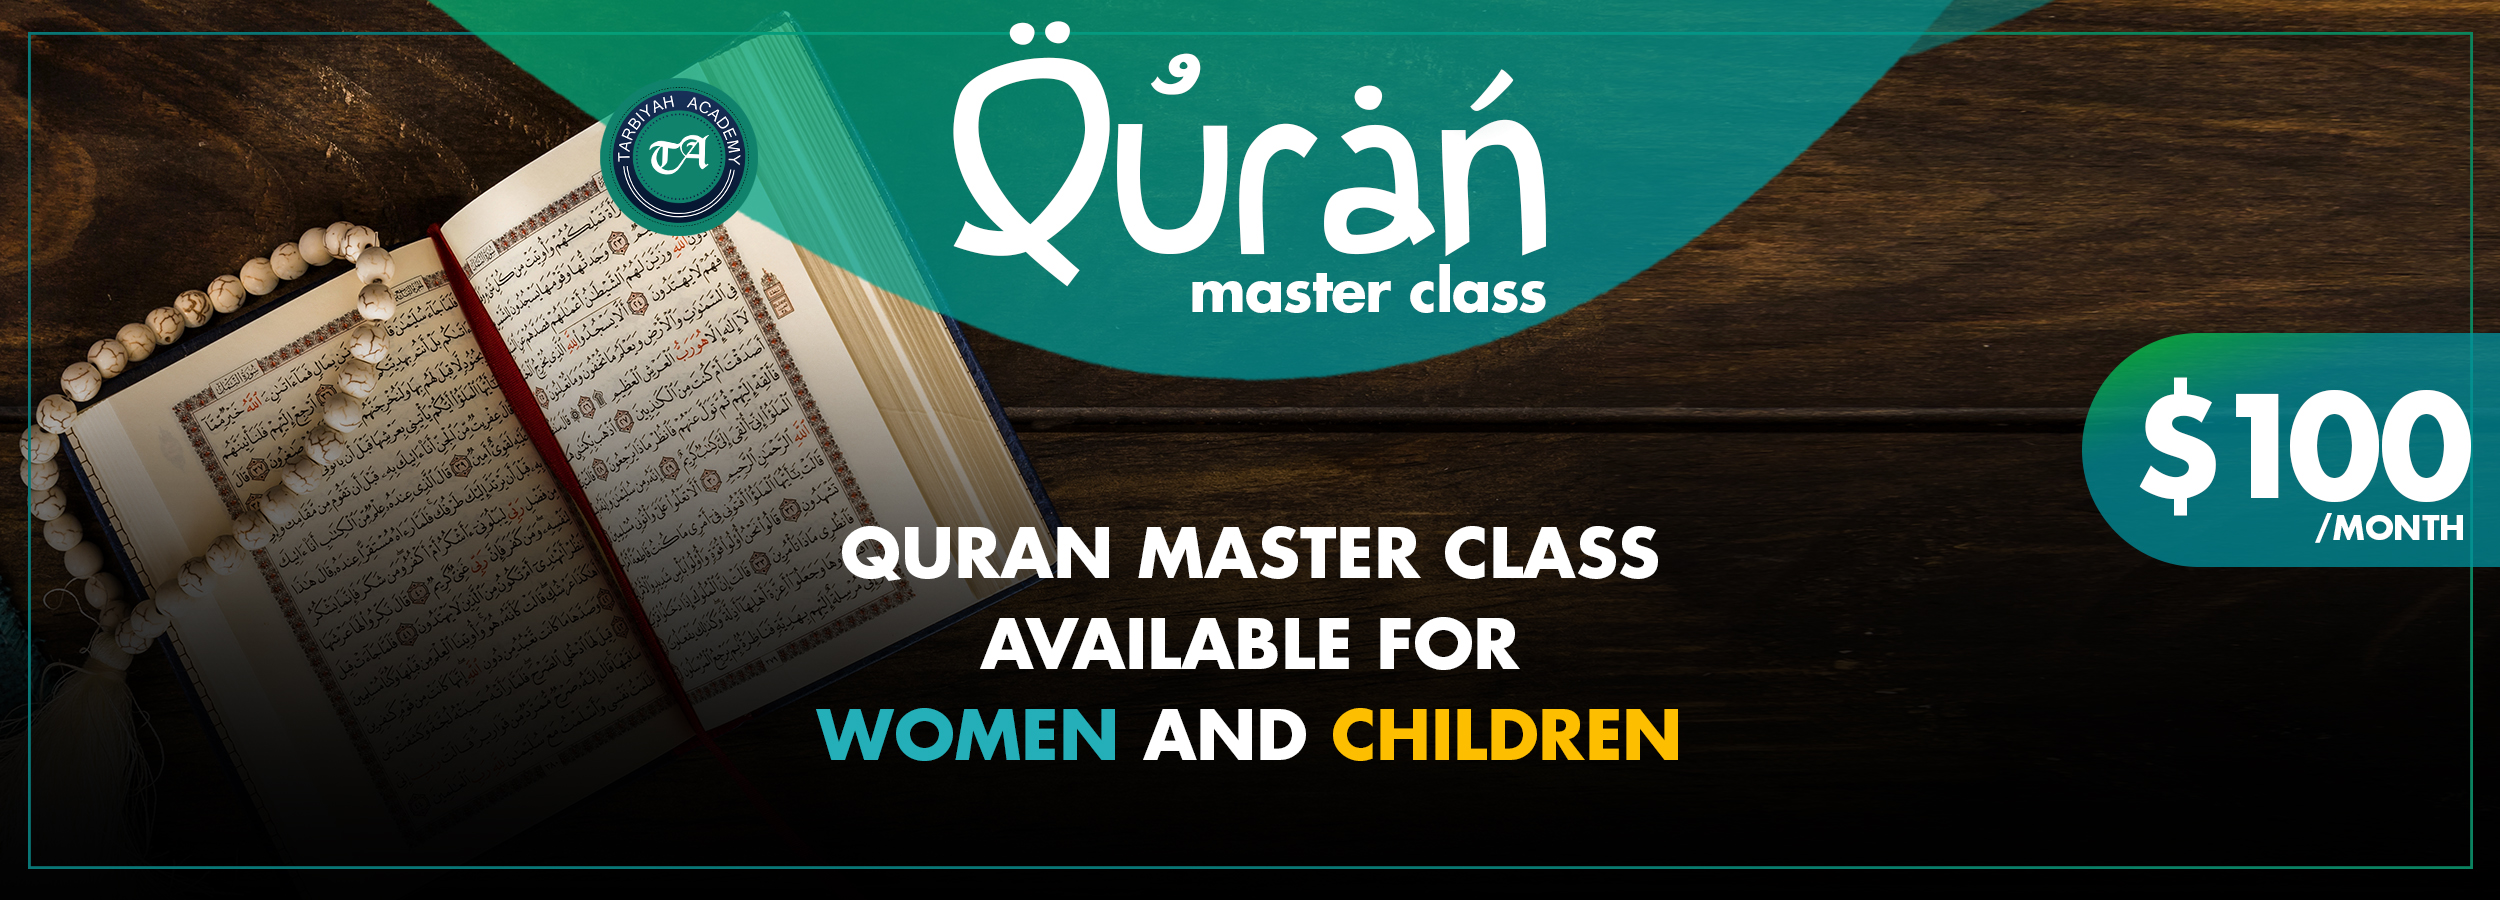 Qur'an Master Class available for women and children - $100/month.